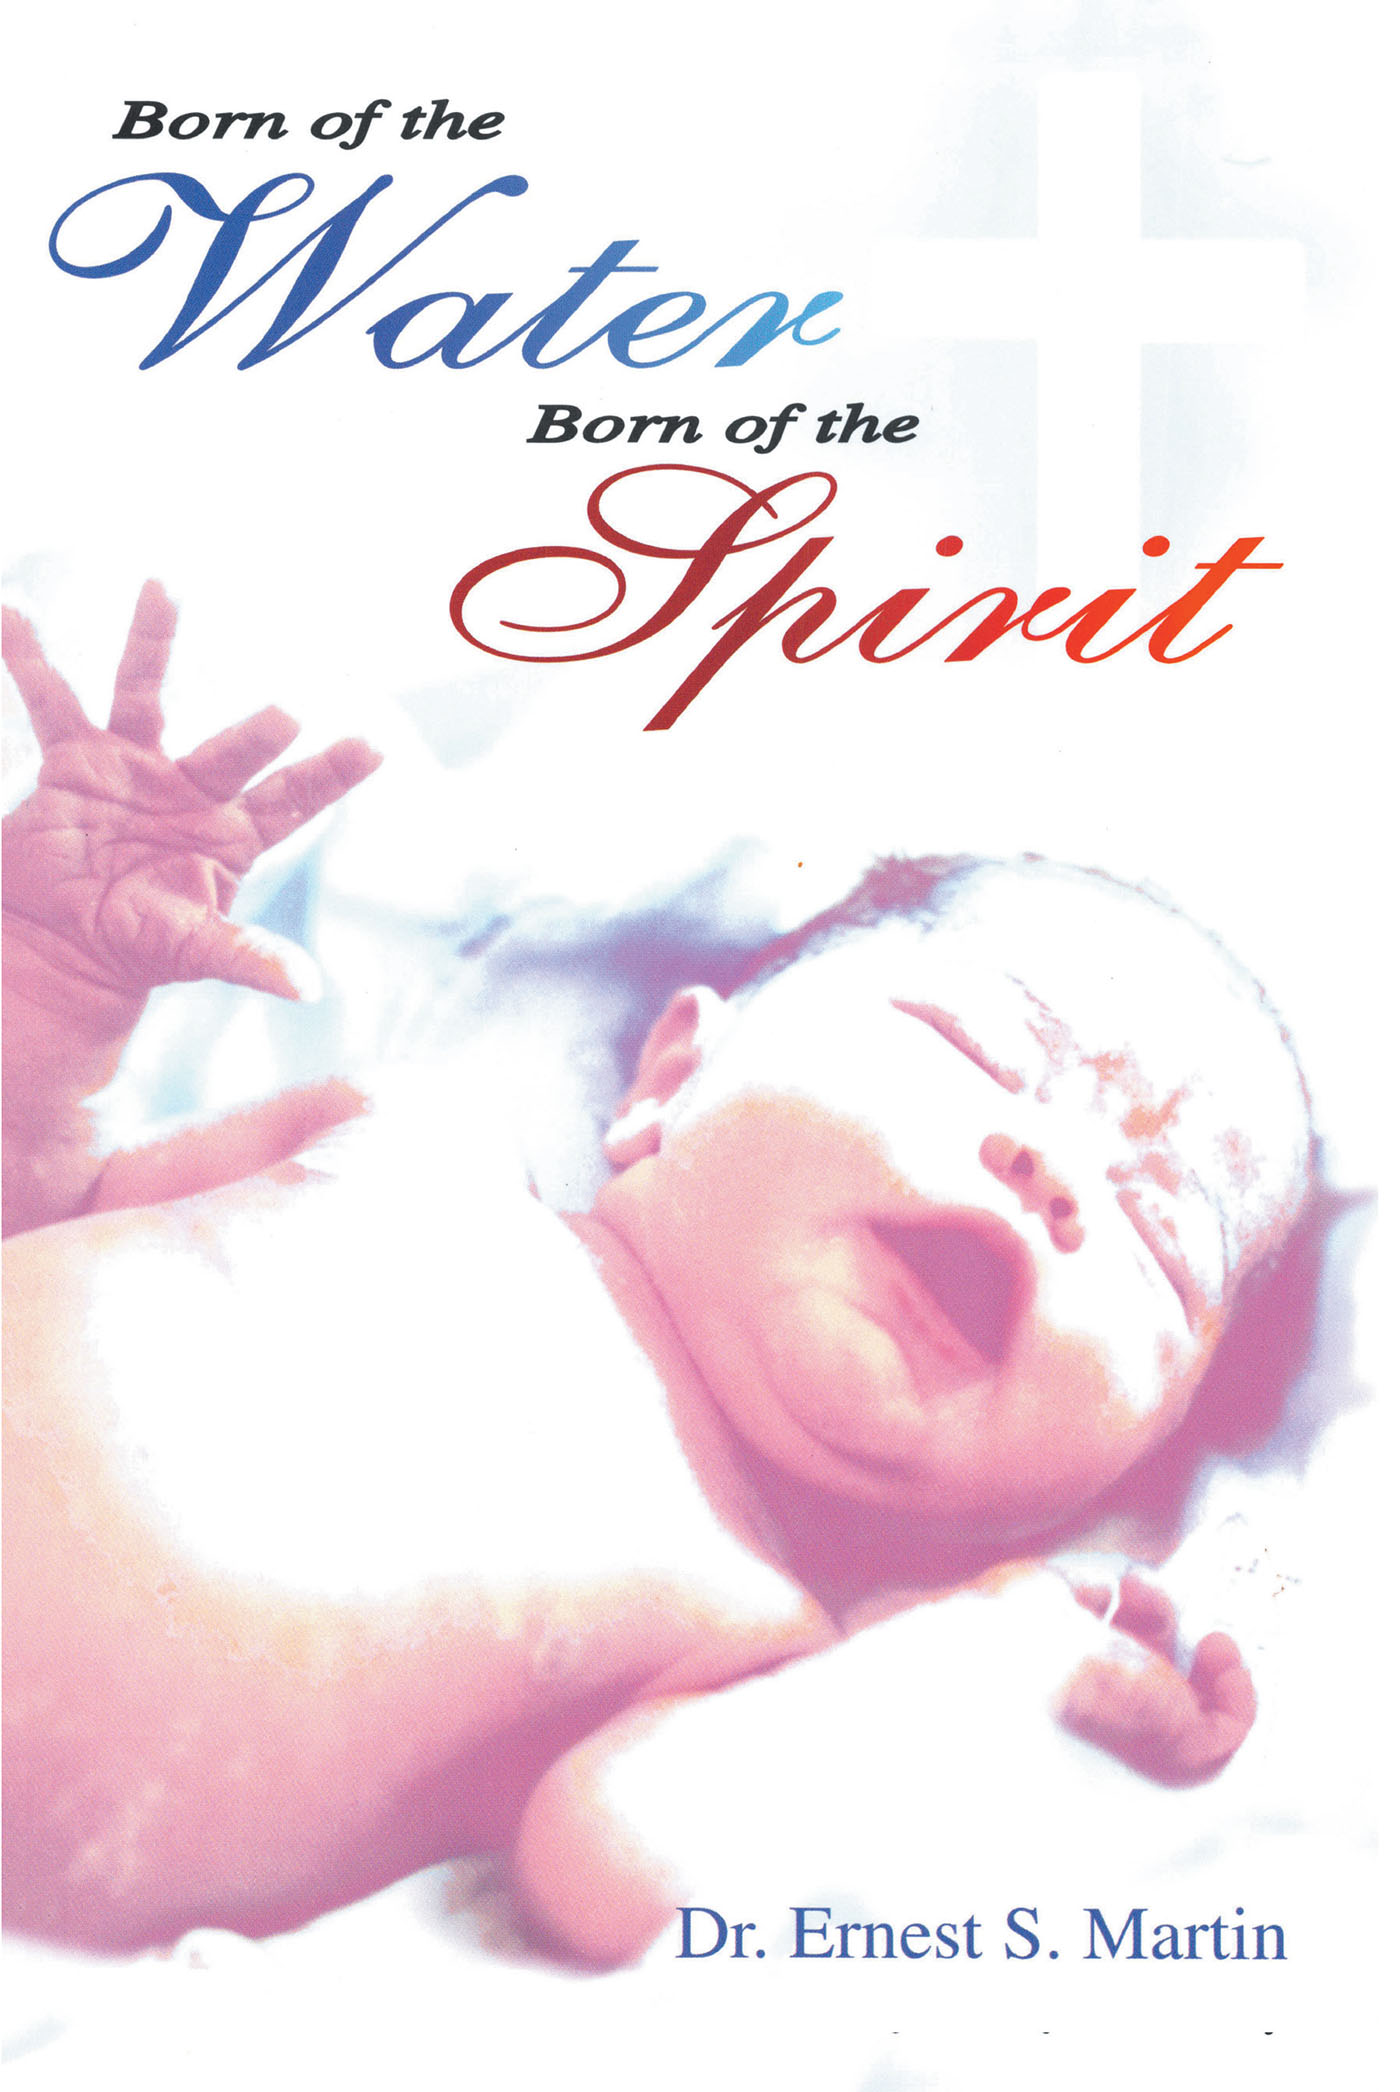 Dr. Ernest S. Martin’s New Book, "Born of the Water Born of the Spirit," is a Discussion of the True Meaning of Salvation by Comparing Physical Birth and Spiritual Birth